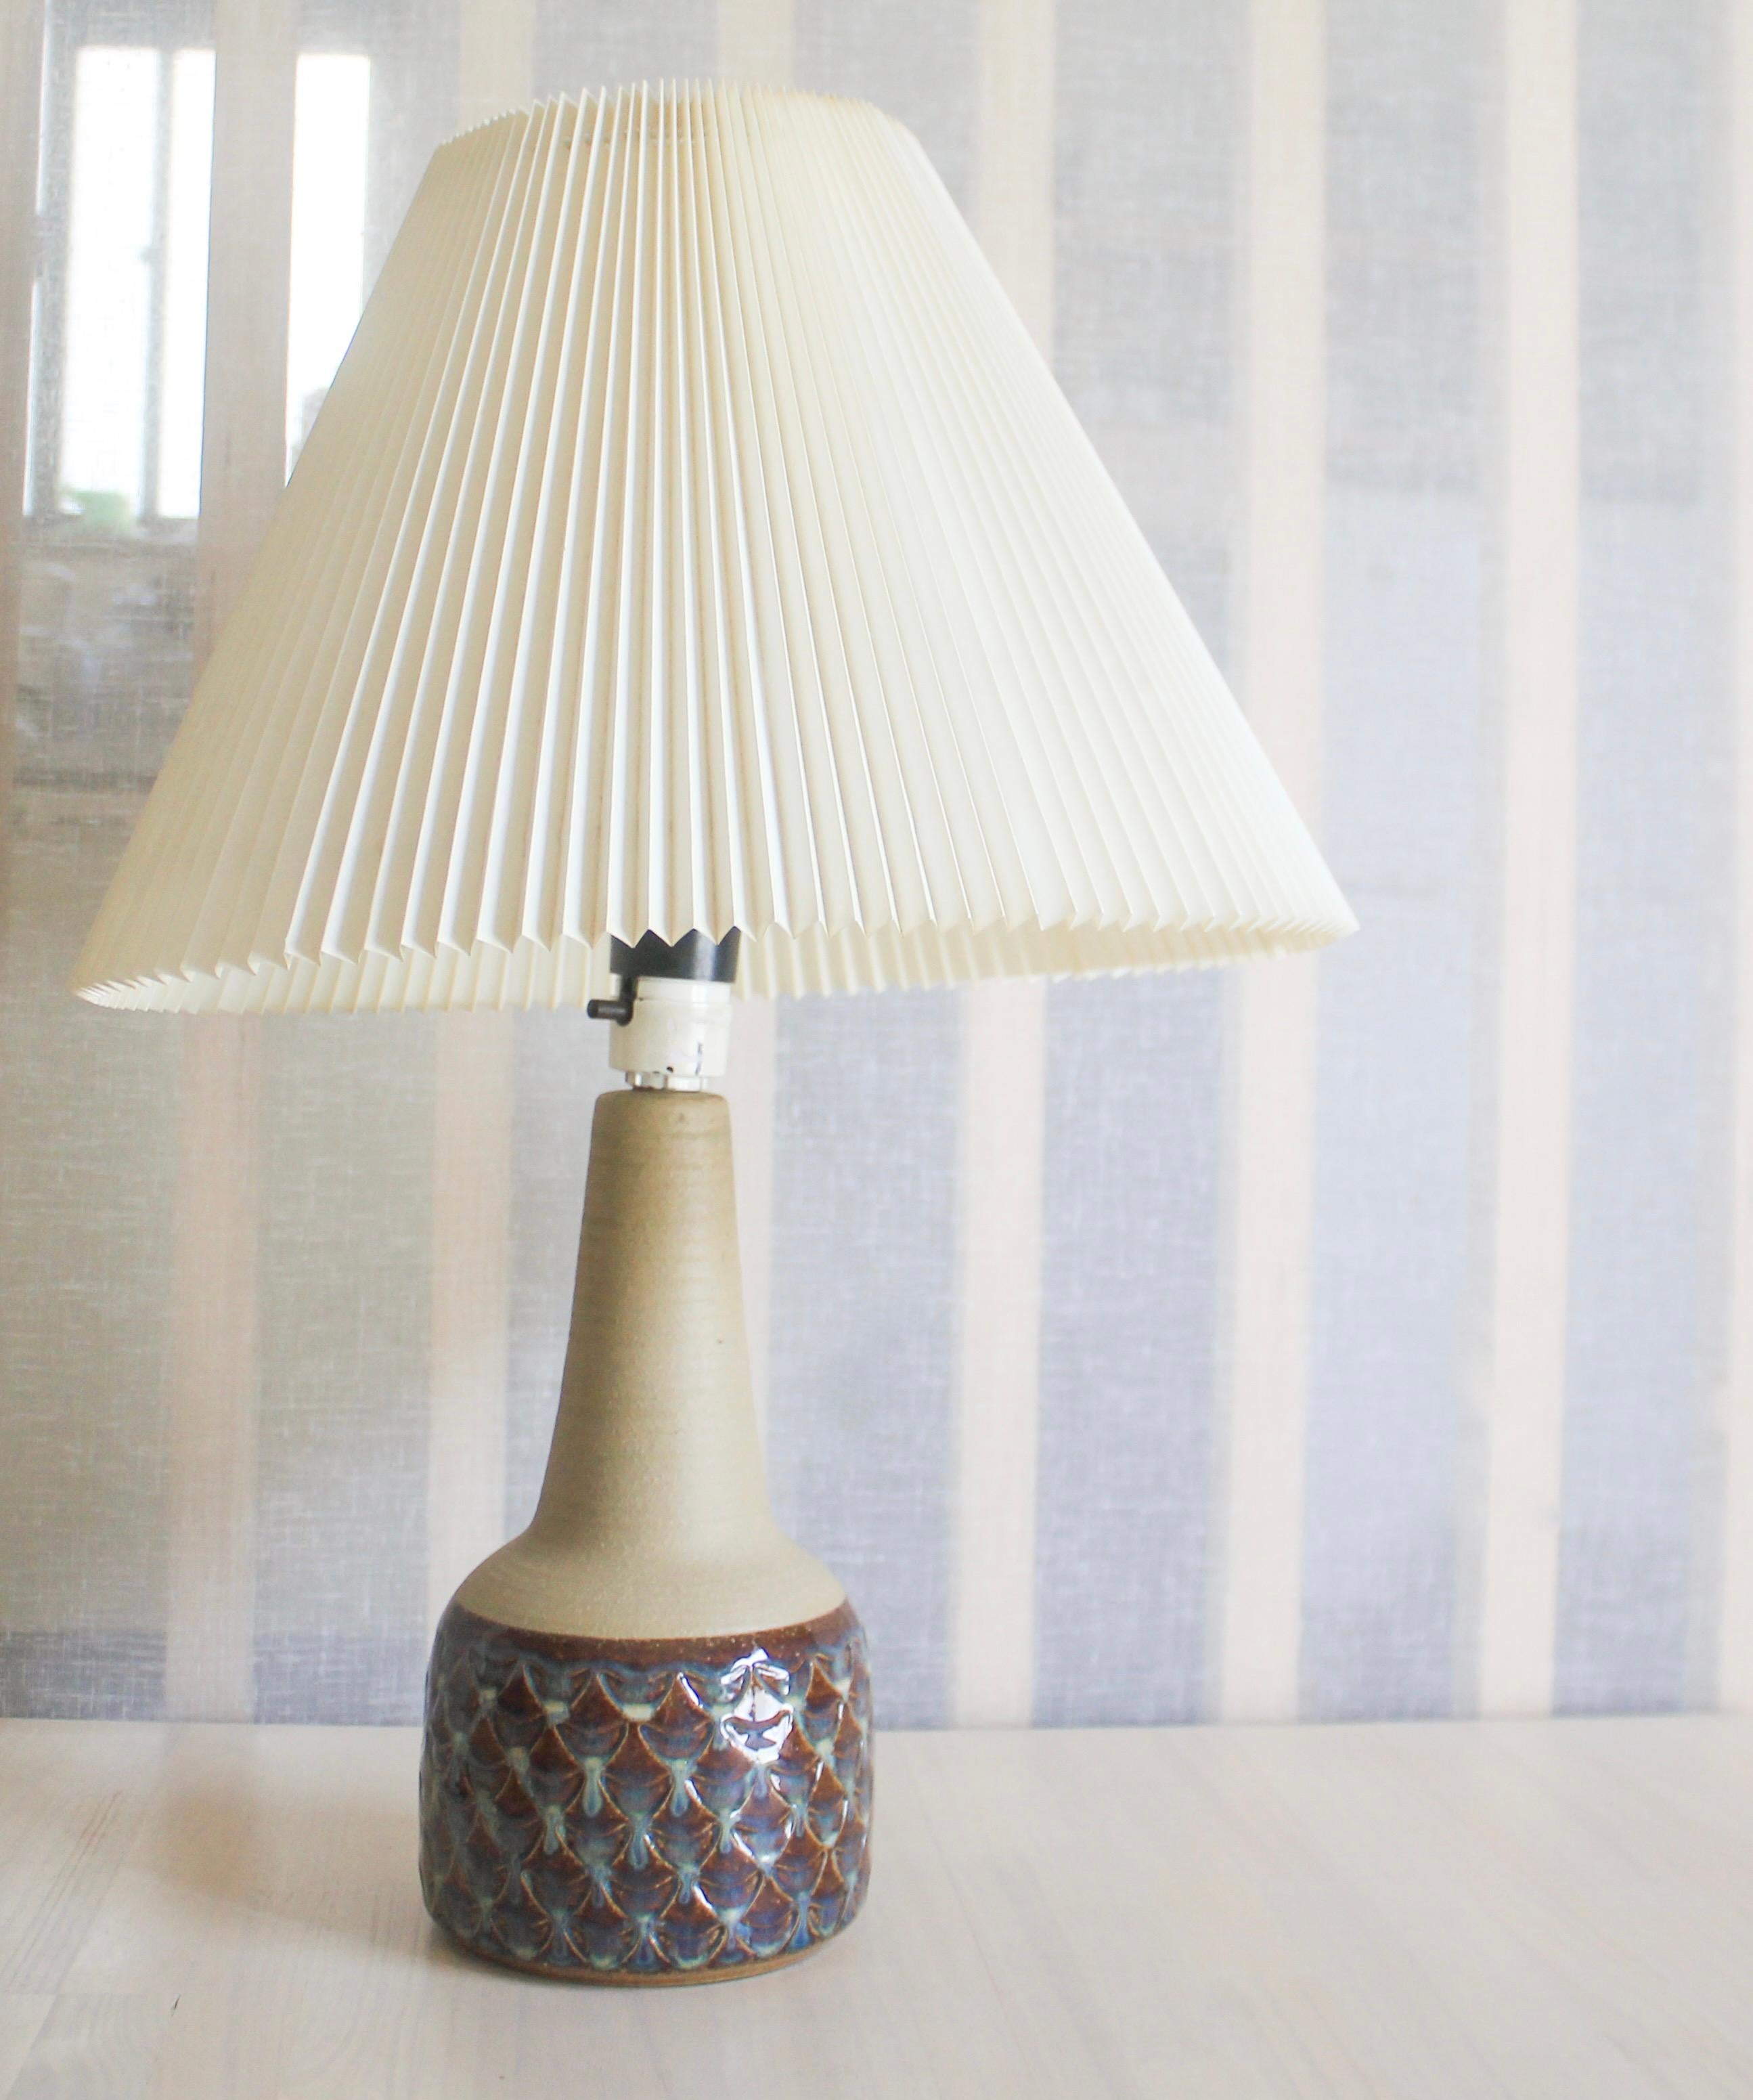 A stoneware table lamp handmade by Einar Johansen for Søholm n the 1960s located on the island of Bornholm in Denmark.

Stamped and signed on the base.

Sold without lampshade. Height includes socket. fully functional and in beautiful condition.